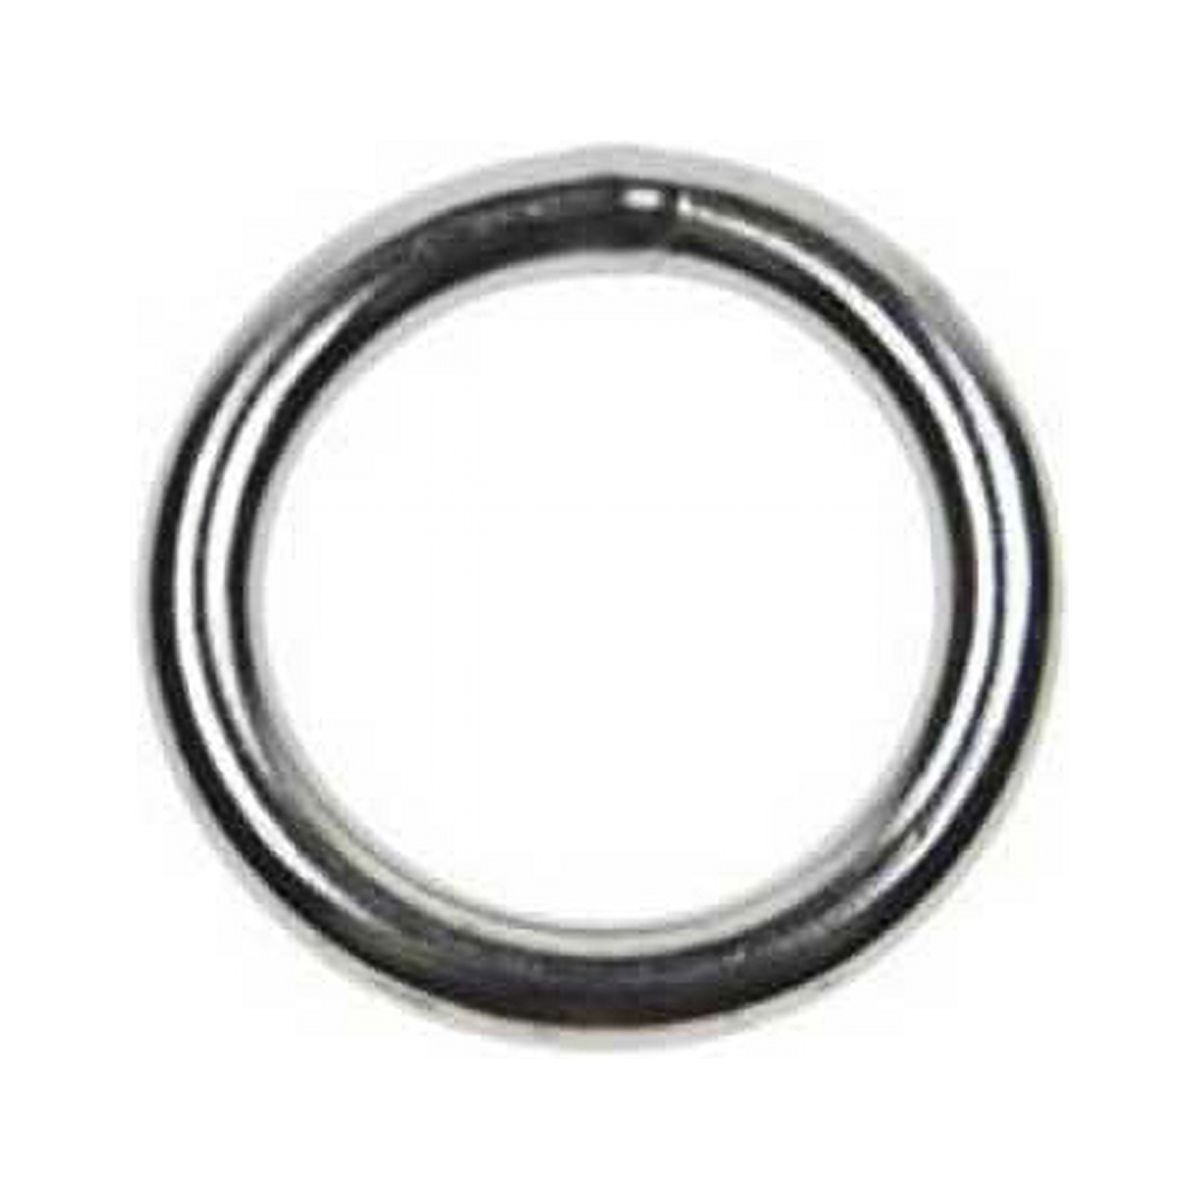 Round Ring - Stainless Steel T304 - 5/16" x  2" - image 1 of 2